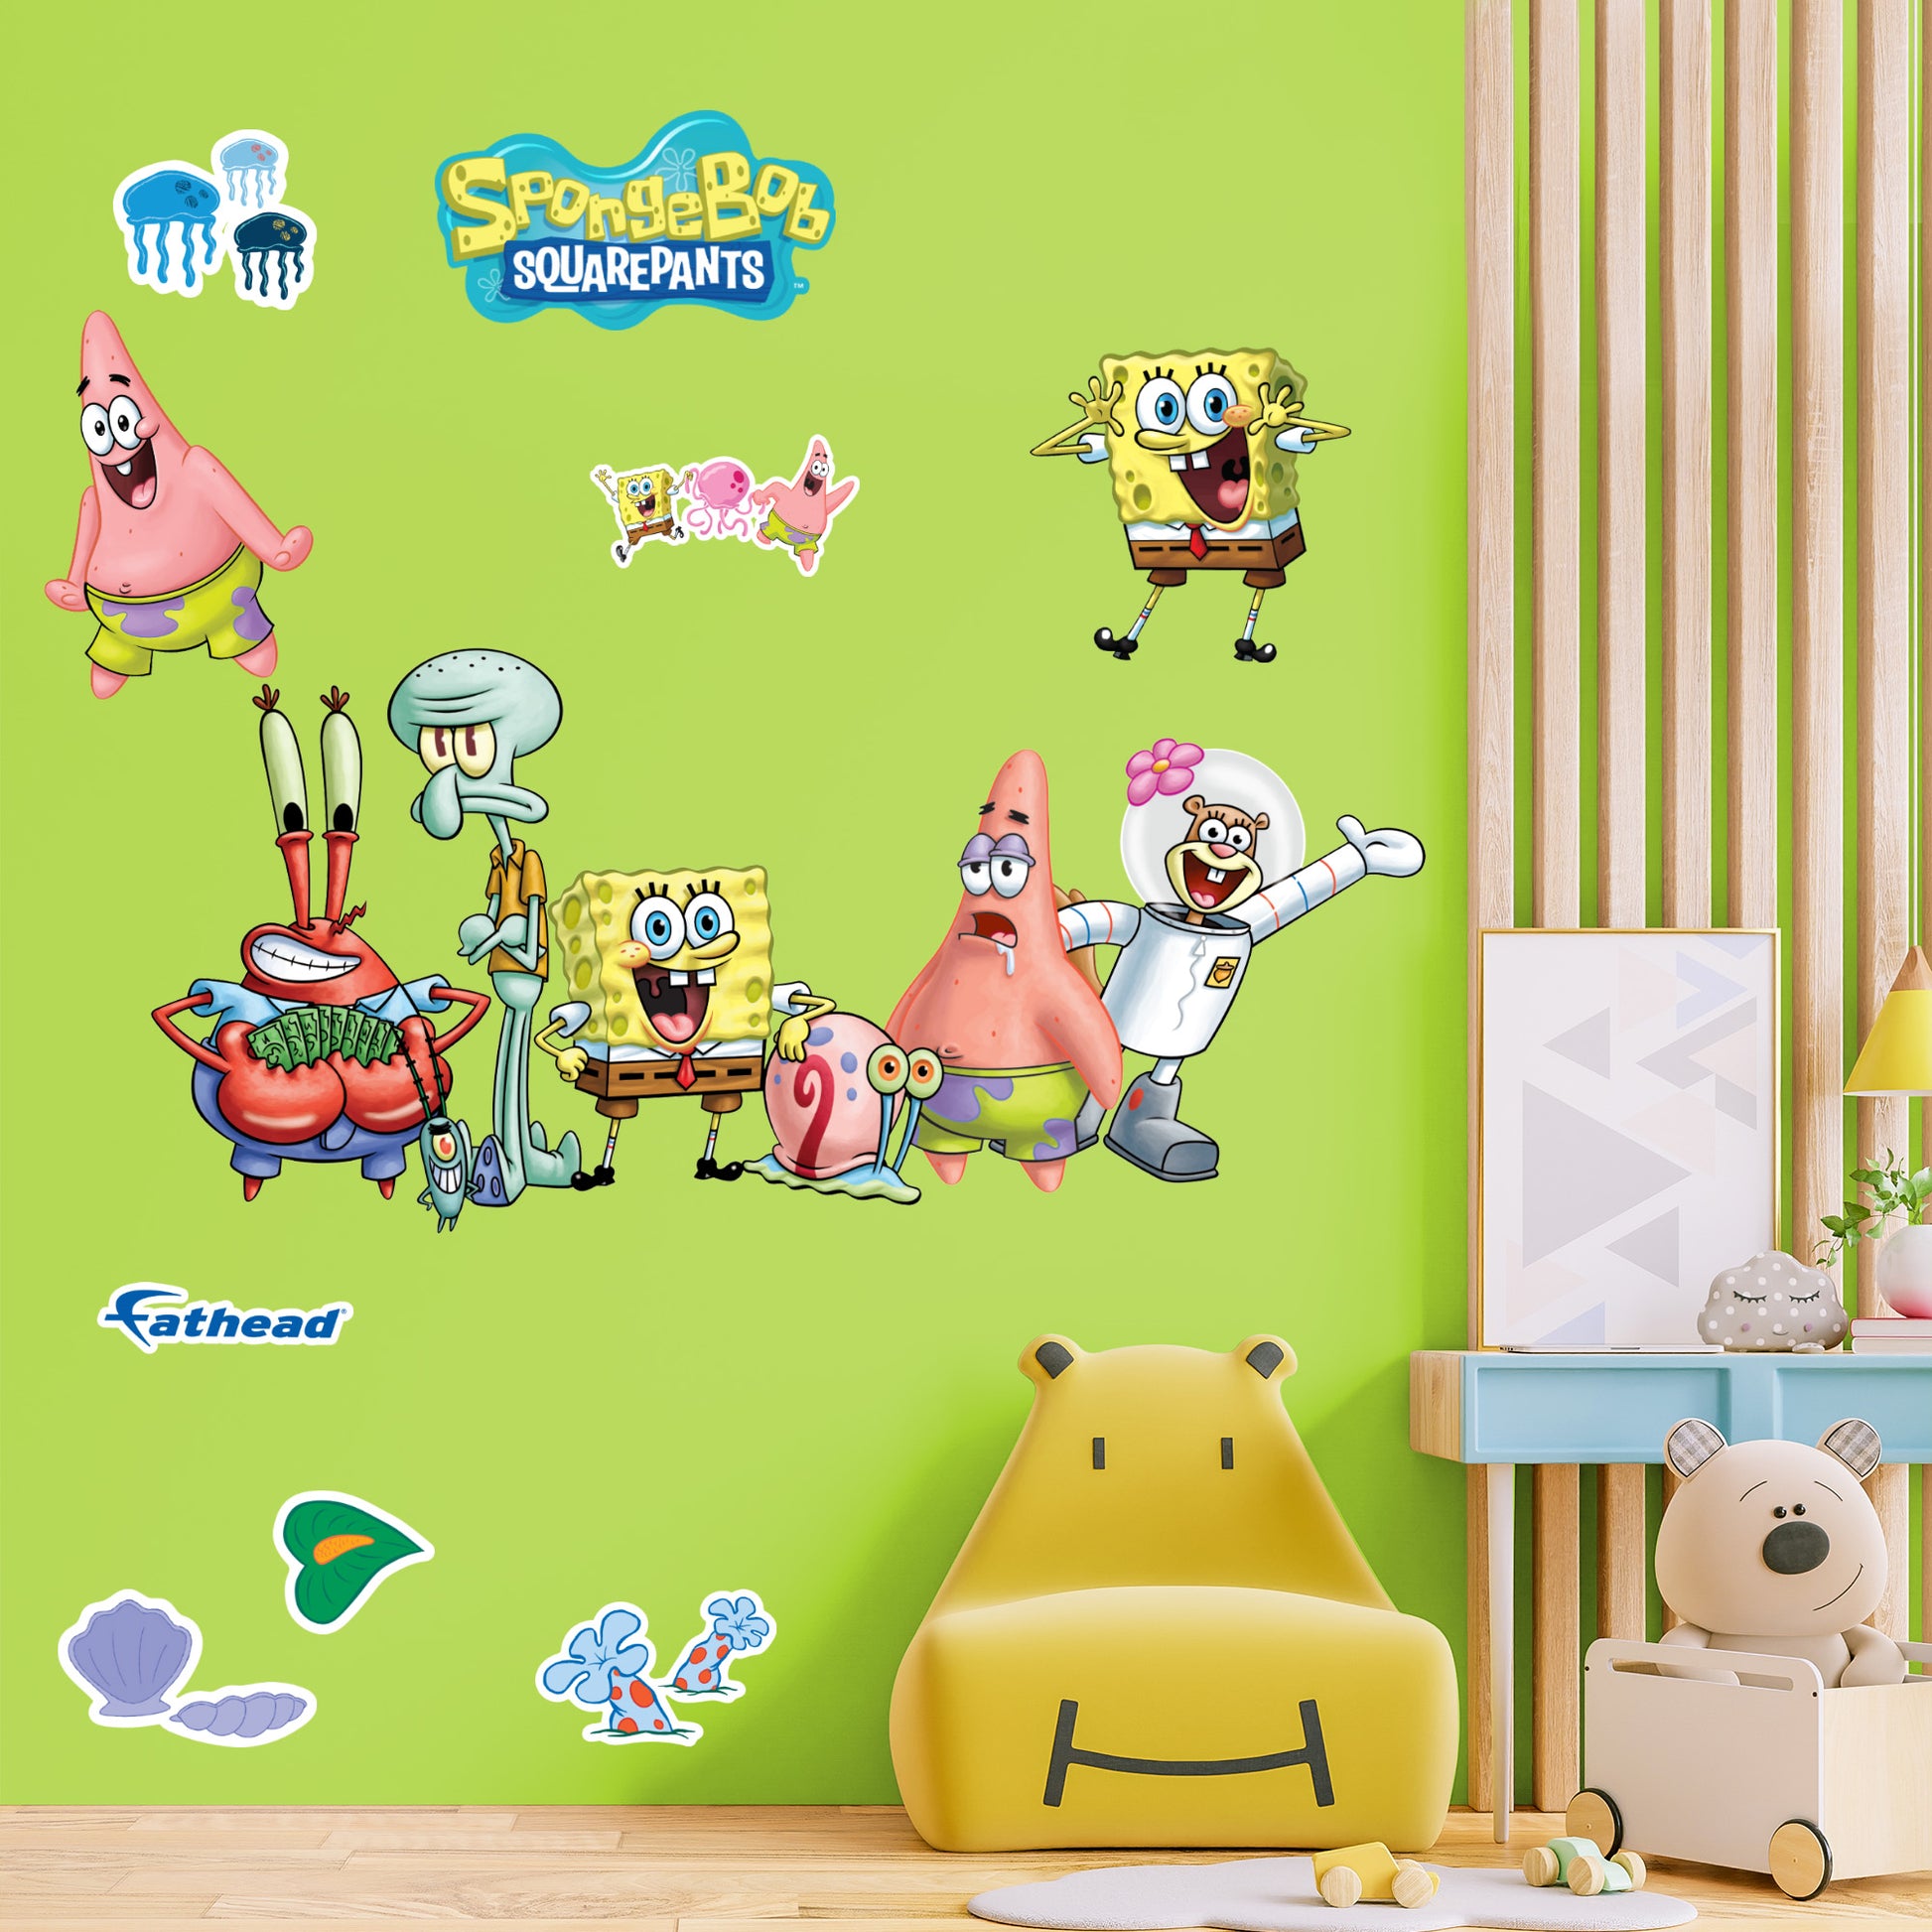 Life-Size Character +9 Decals (86"W x 41"H)